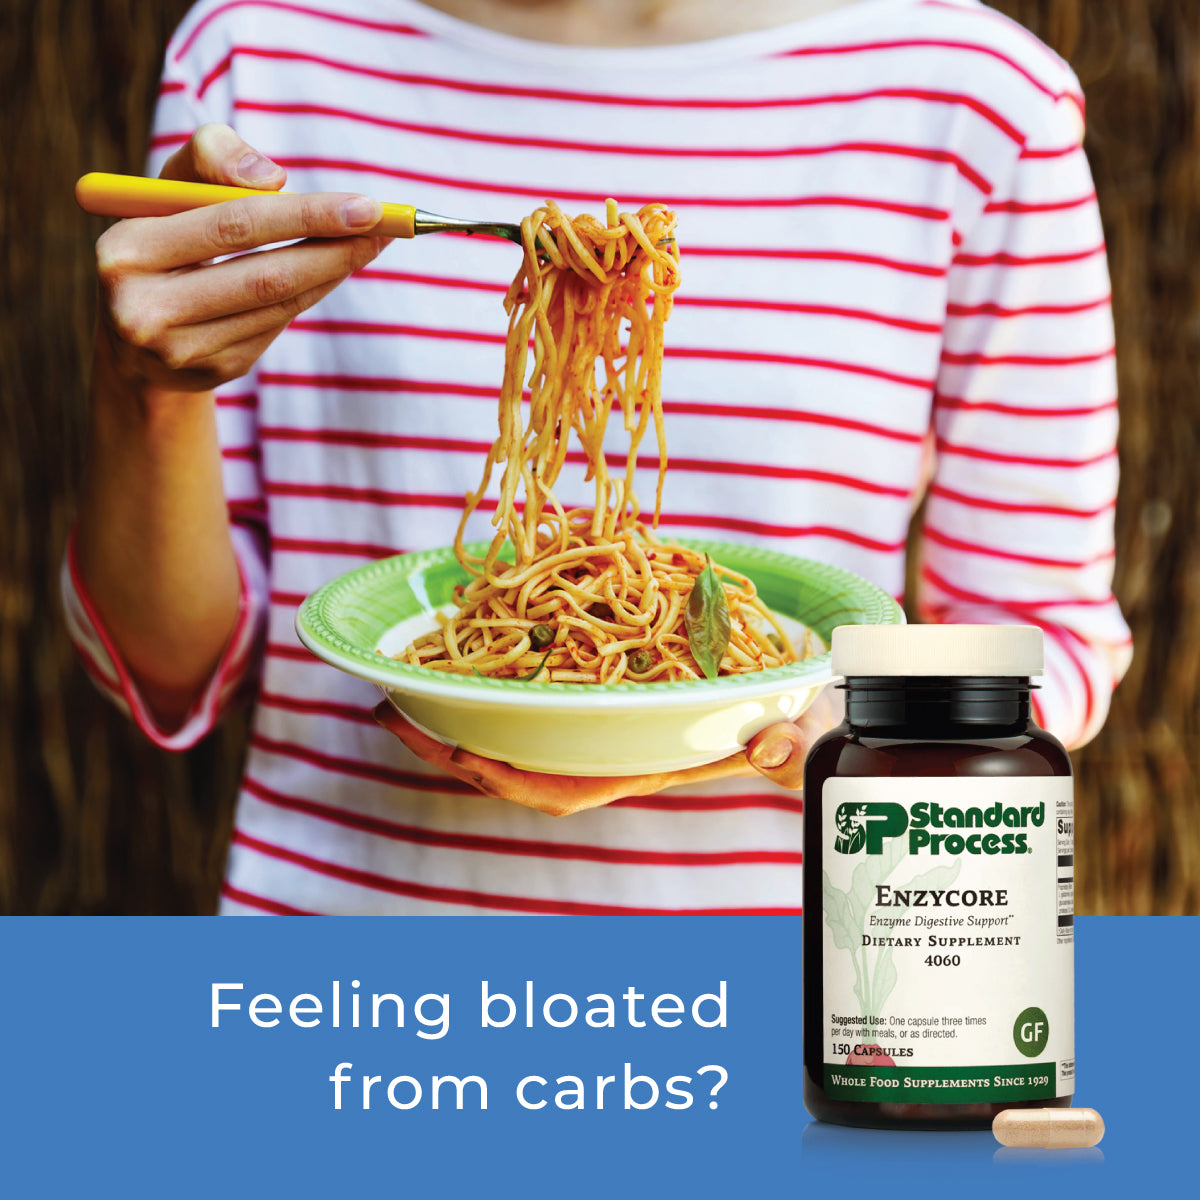 Feeling bloated from carbs?